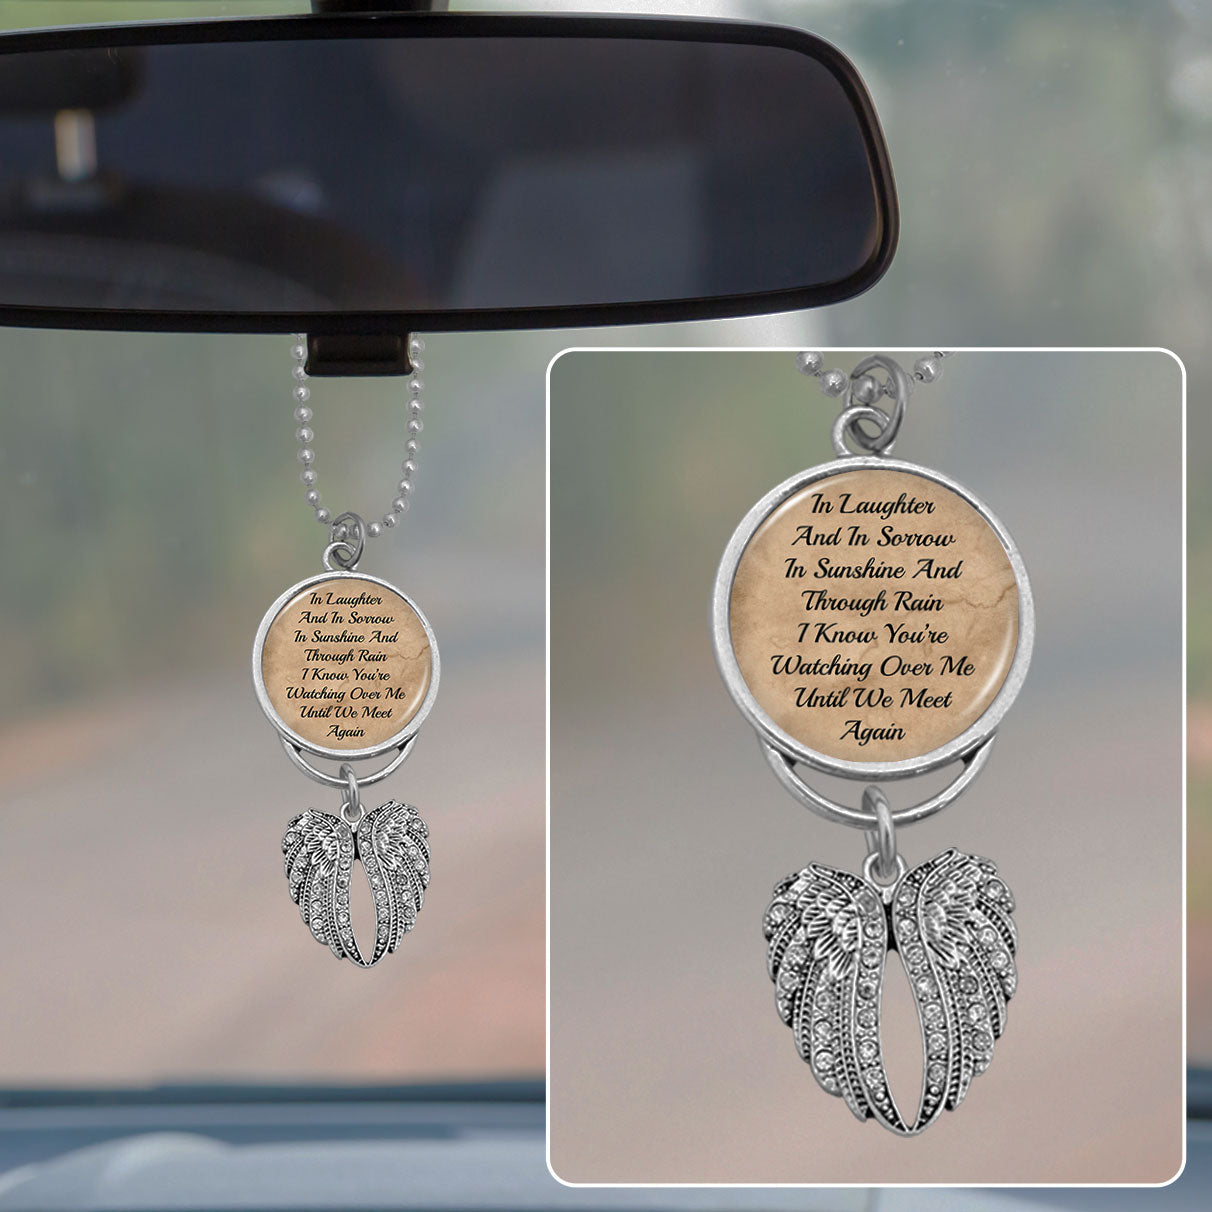 Watching Over Me Rearview Mirror Charm